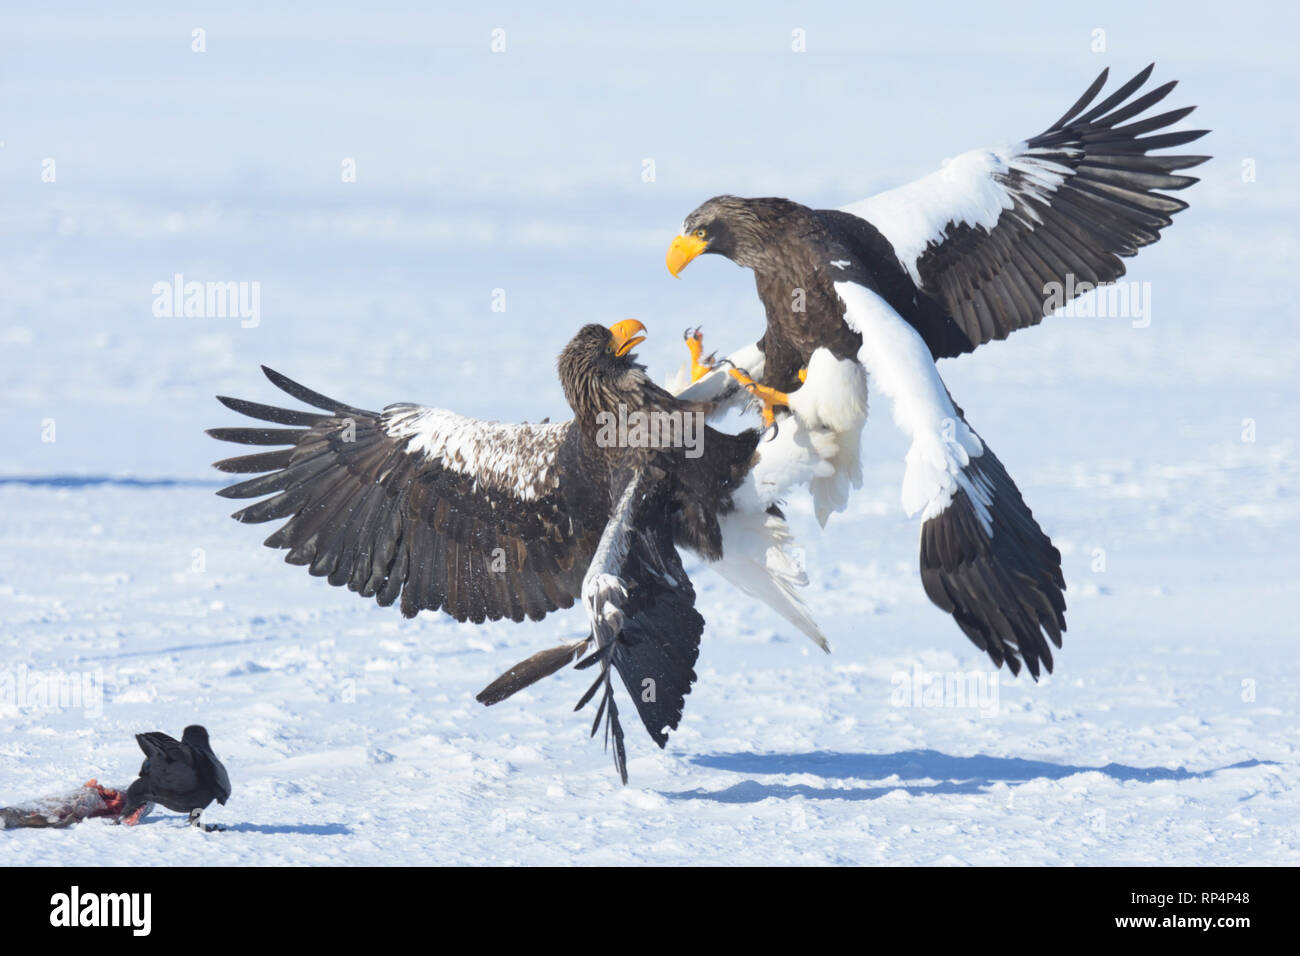 Two Steller's Sea Eagles (Haliaeetus pelagicus) fighting while a crow steals their fish. Stock Photo